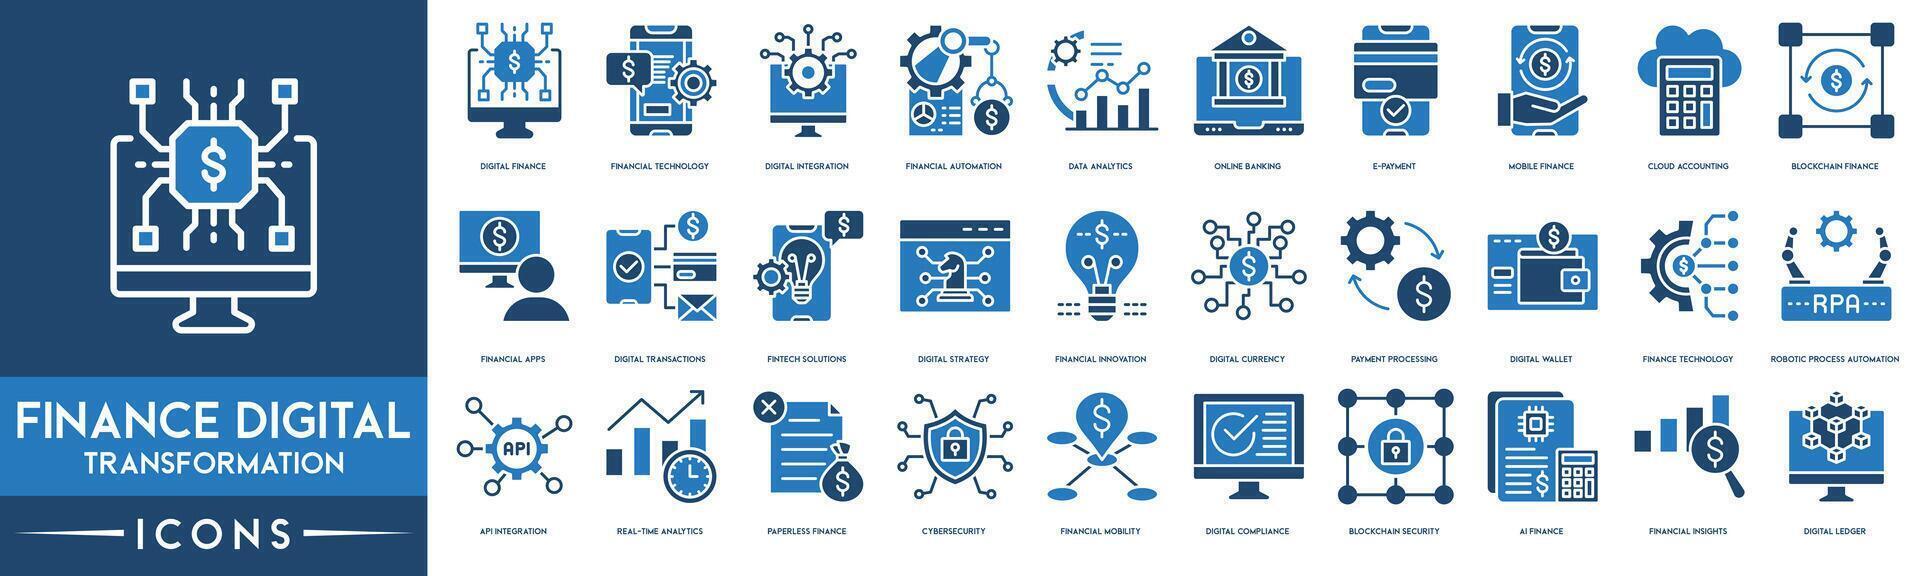 Finance Digital Tranformations icon. Digital Finance, Financial Technology, Digital Integration, Financial Automation, Data Analytics, Online Banking, E-payment, Mobile Finance and Cloud Accounting vector